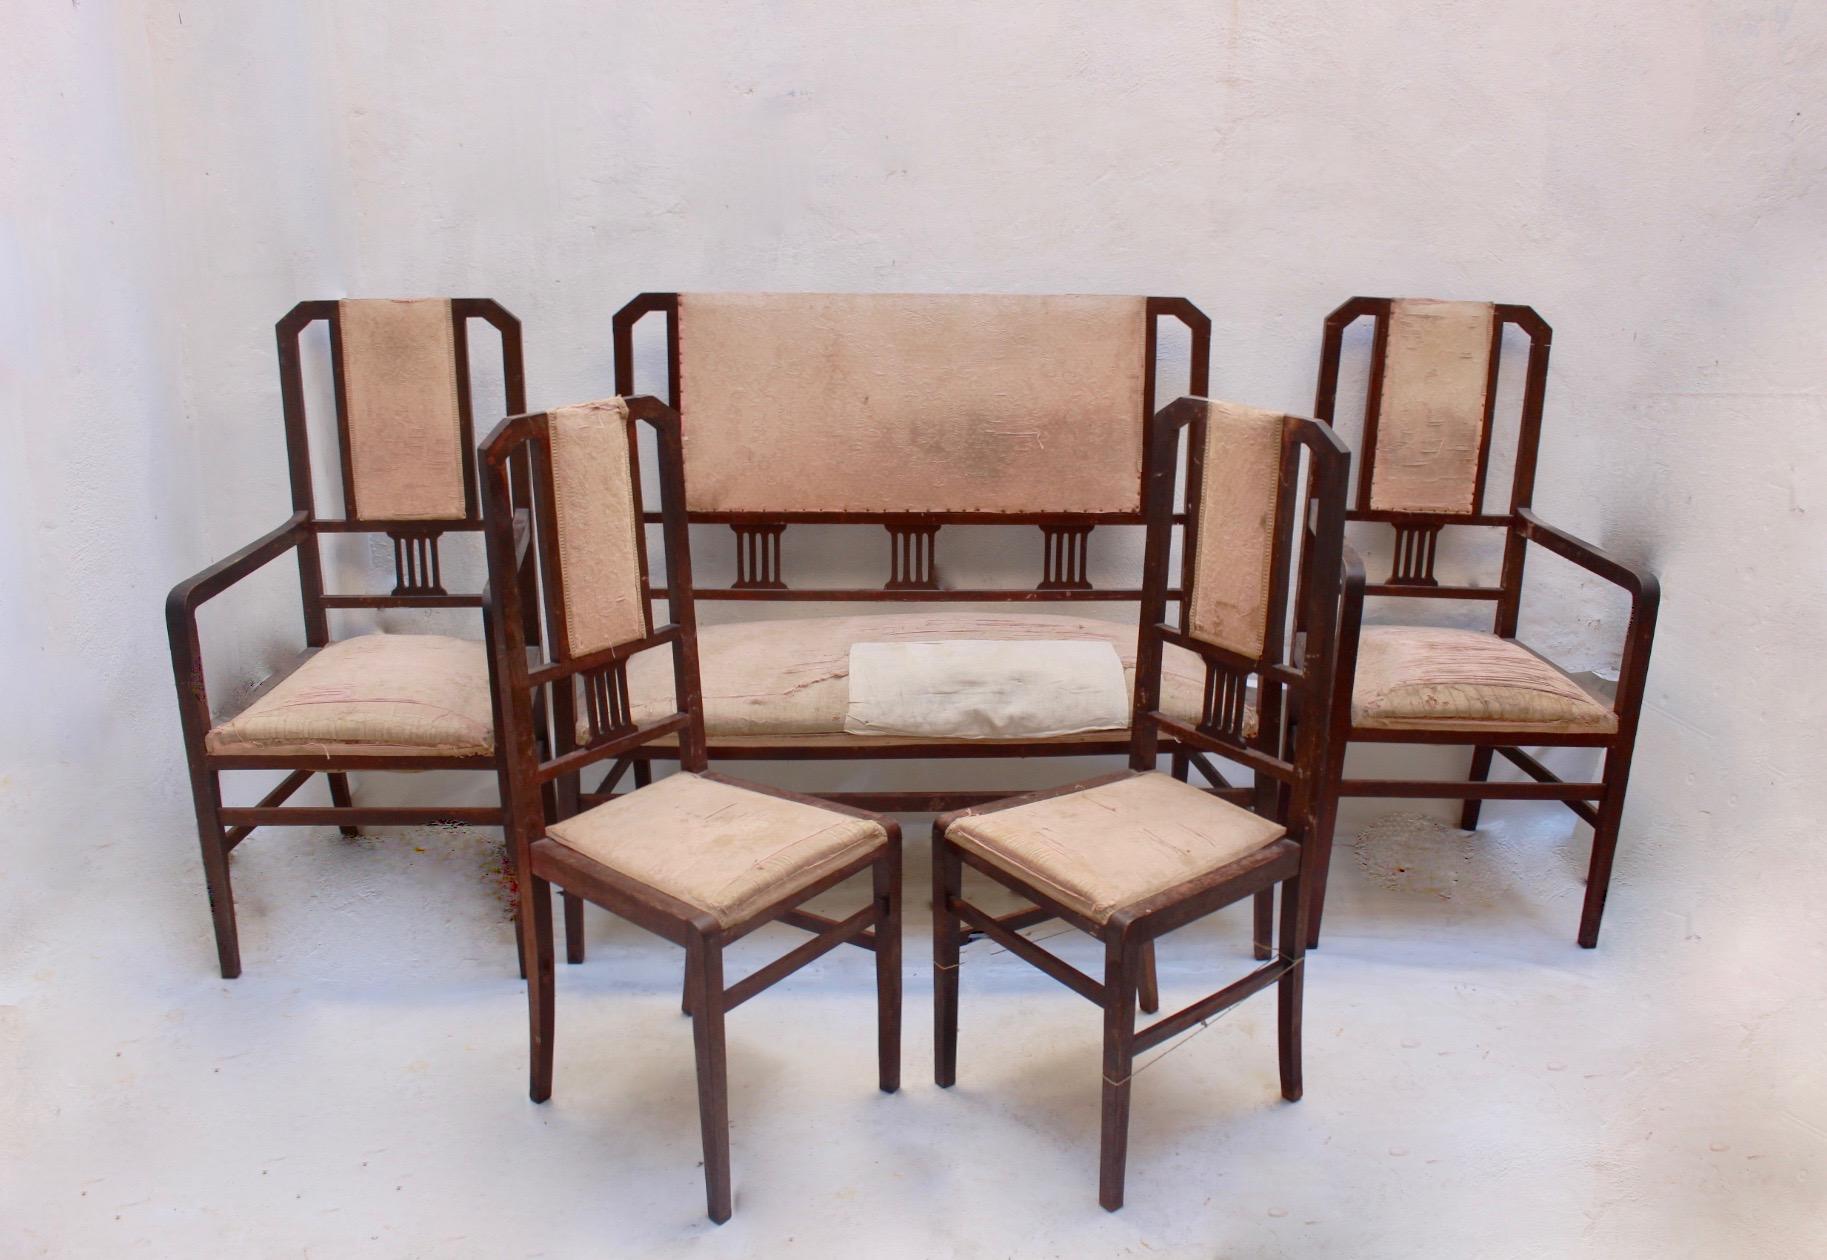 Art Deco Beech Living Room Set Settee and 4 Chairs, Spain, 1930s For Sale 14